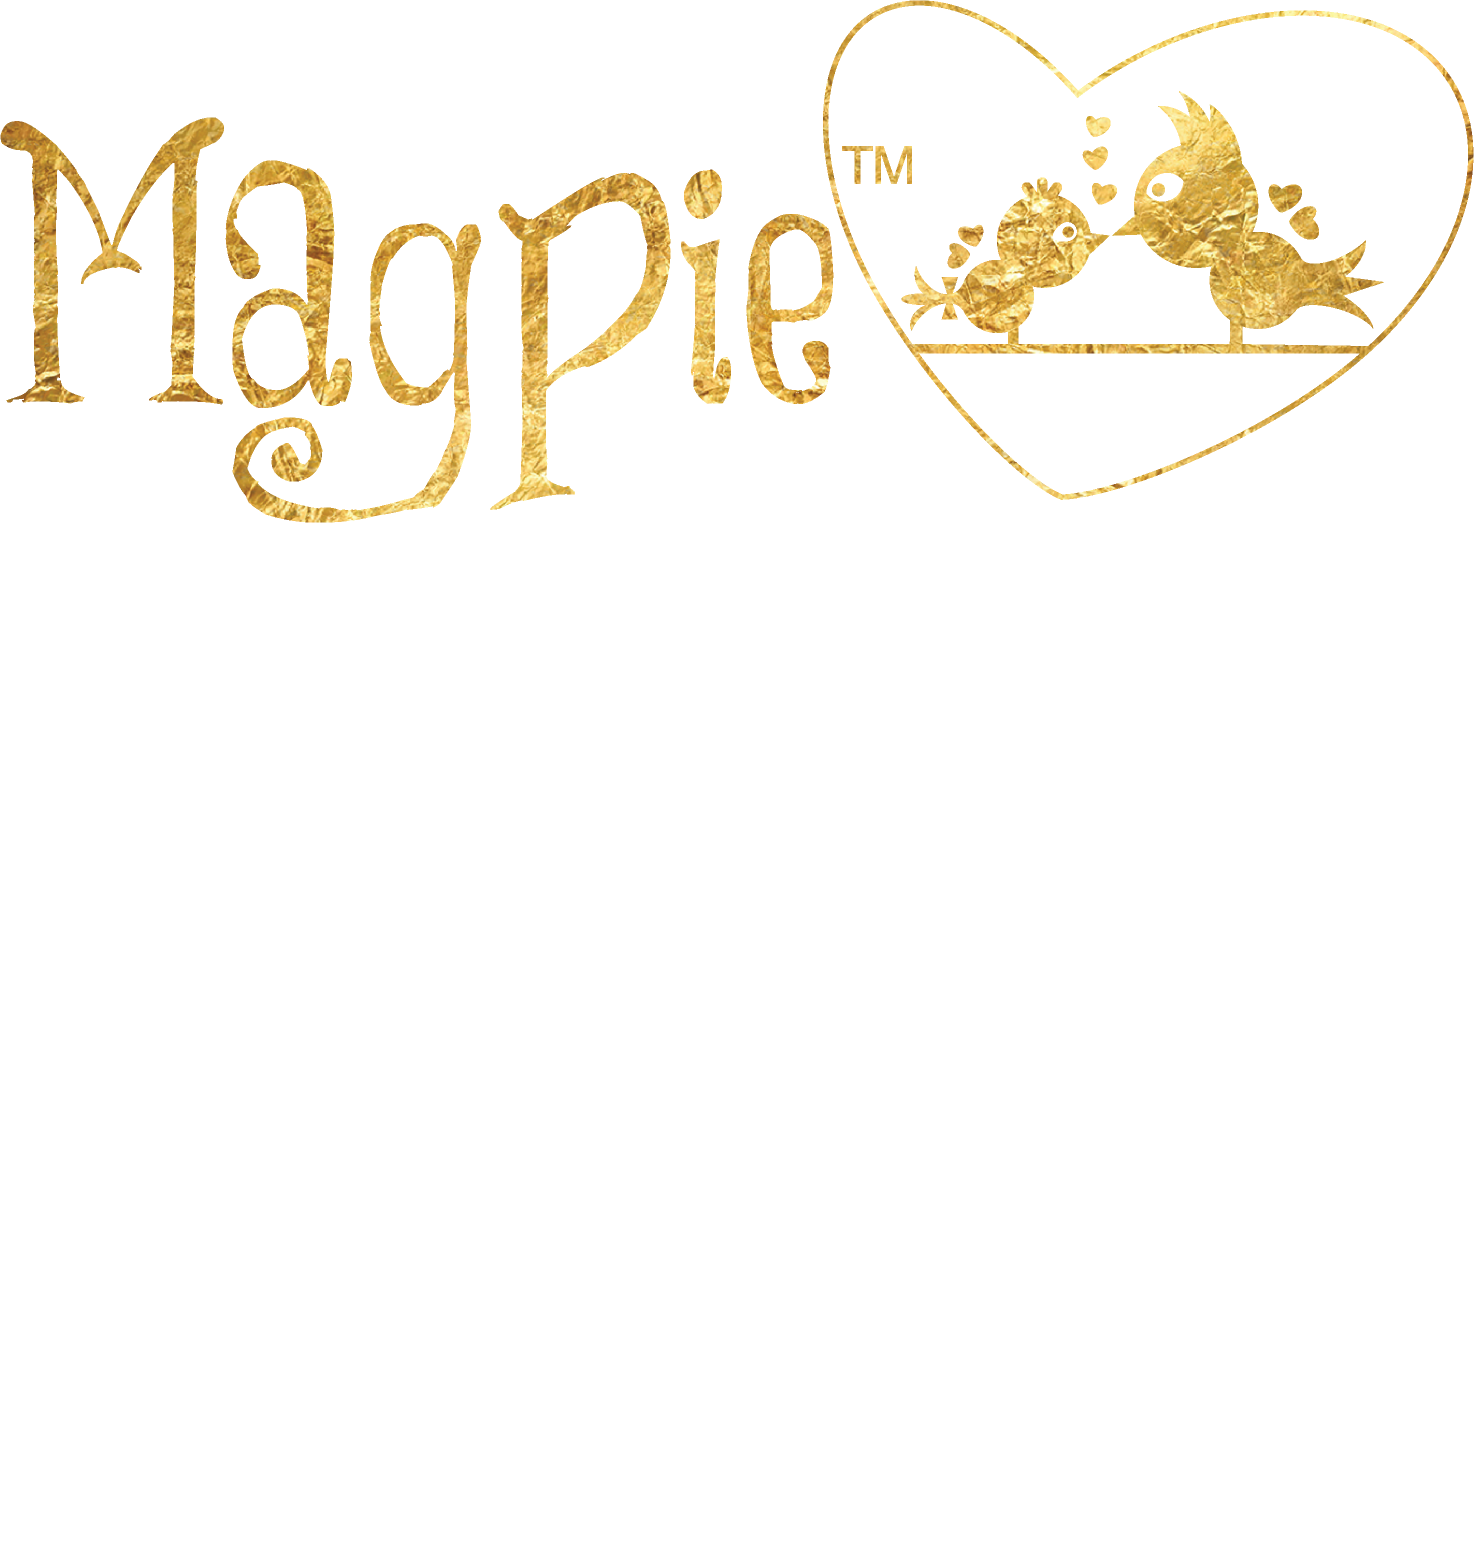 If you are interested in distributing our products in Canada, please contact help@magpiebeauty.co.uk . If you wish to place an order, please visit: magpiebeautyusa.com or magpiebeauty.co.uk . Sorry for the inconvenience this may cause. Much Love, Team Magpie X